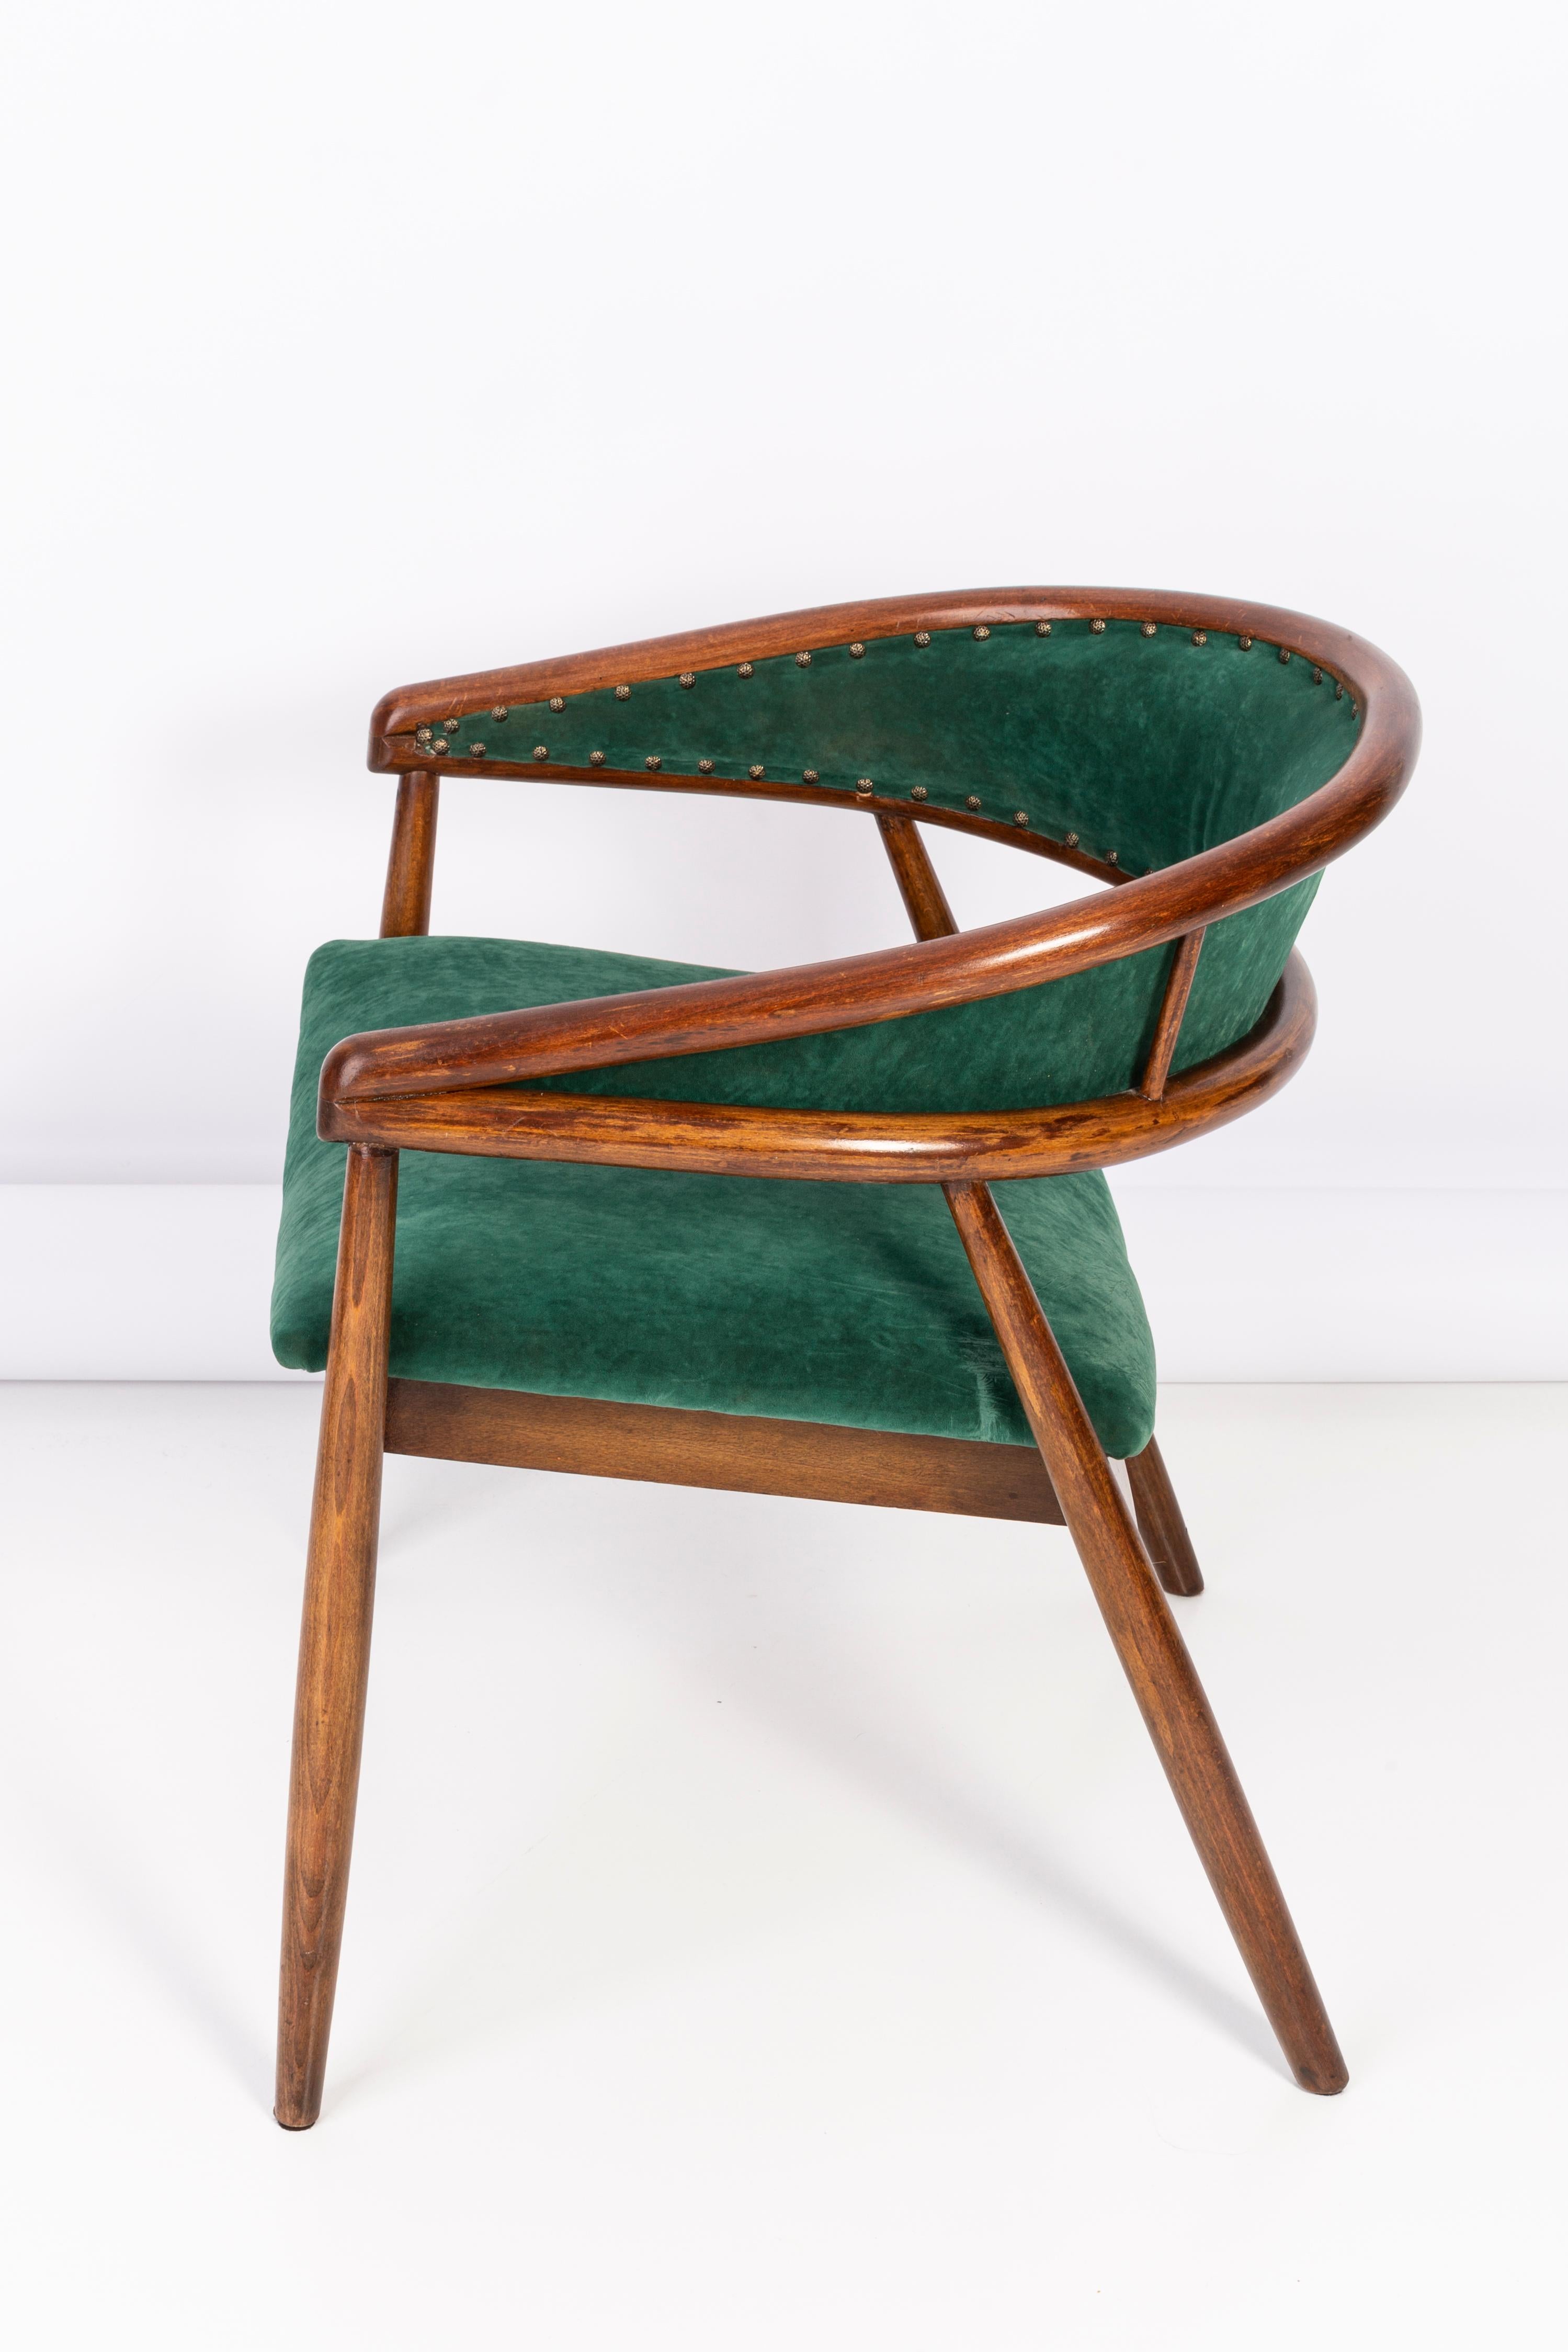 Set of Two Vintage James Mont Bent Beech Armchairs, Dark Green, Europe, 1960s For Sale 2